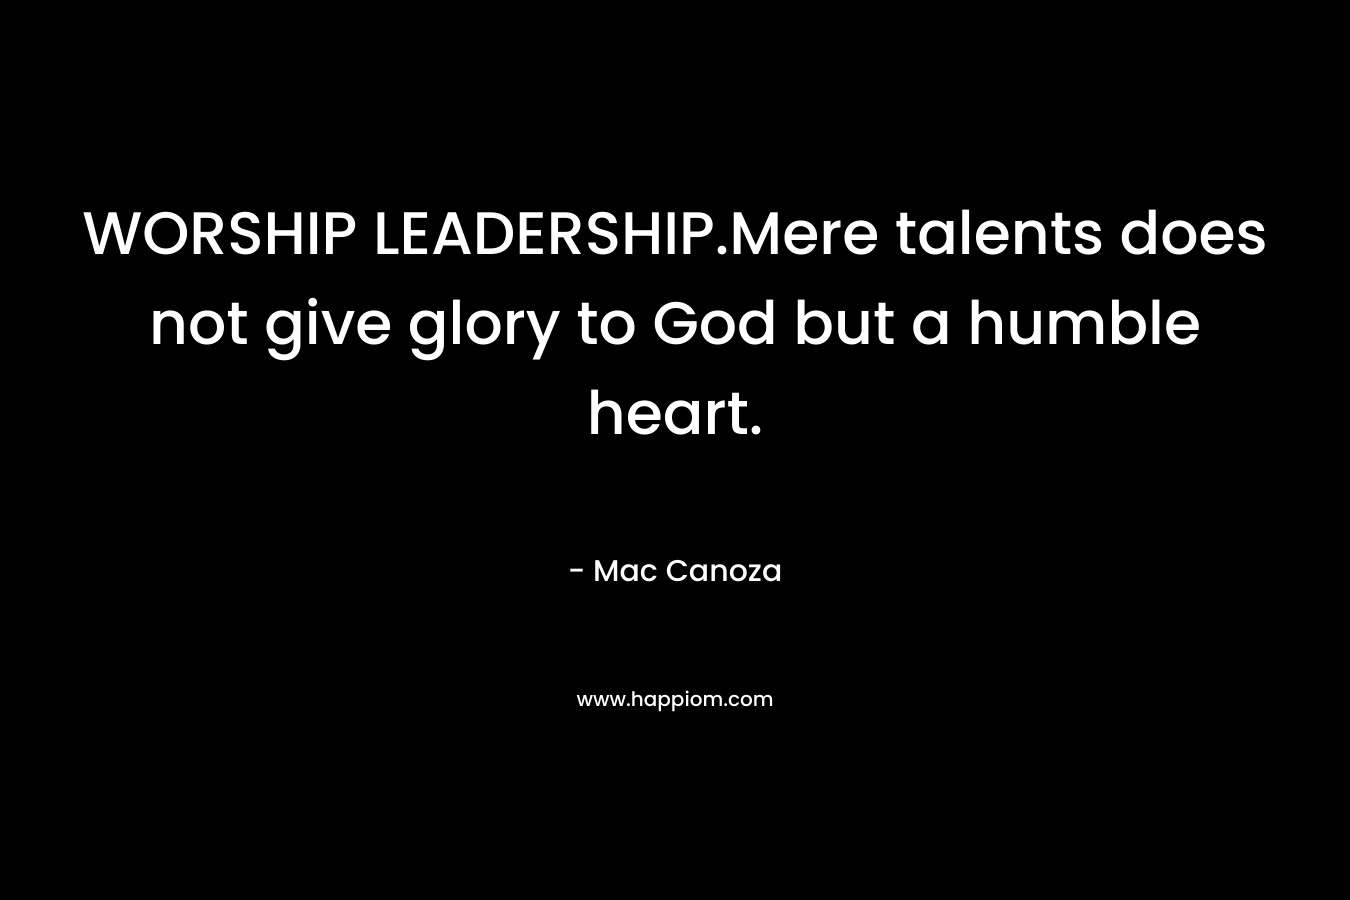 WORSHIP LEADERSHIP.Mere talents does not give glory to God but a humble heart.